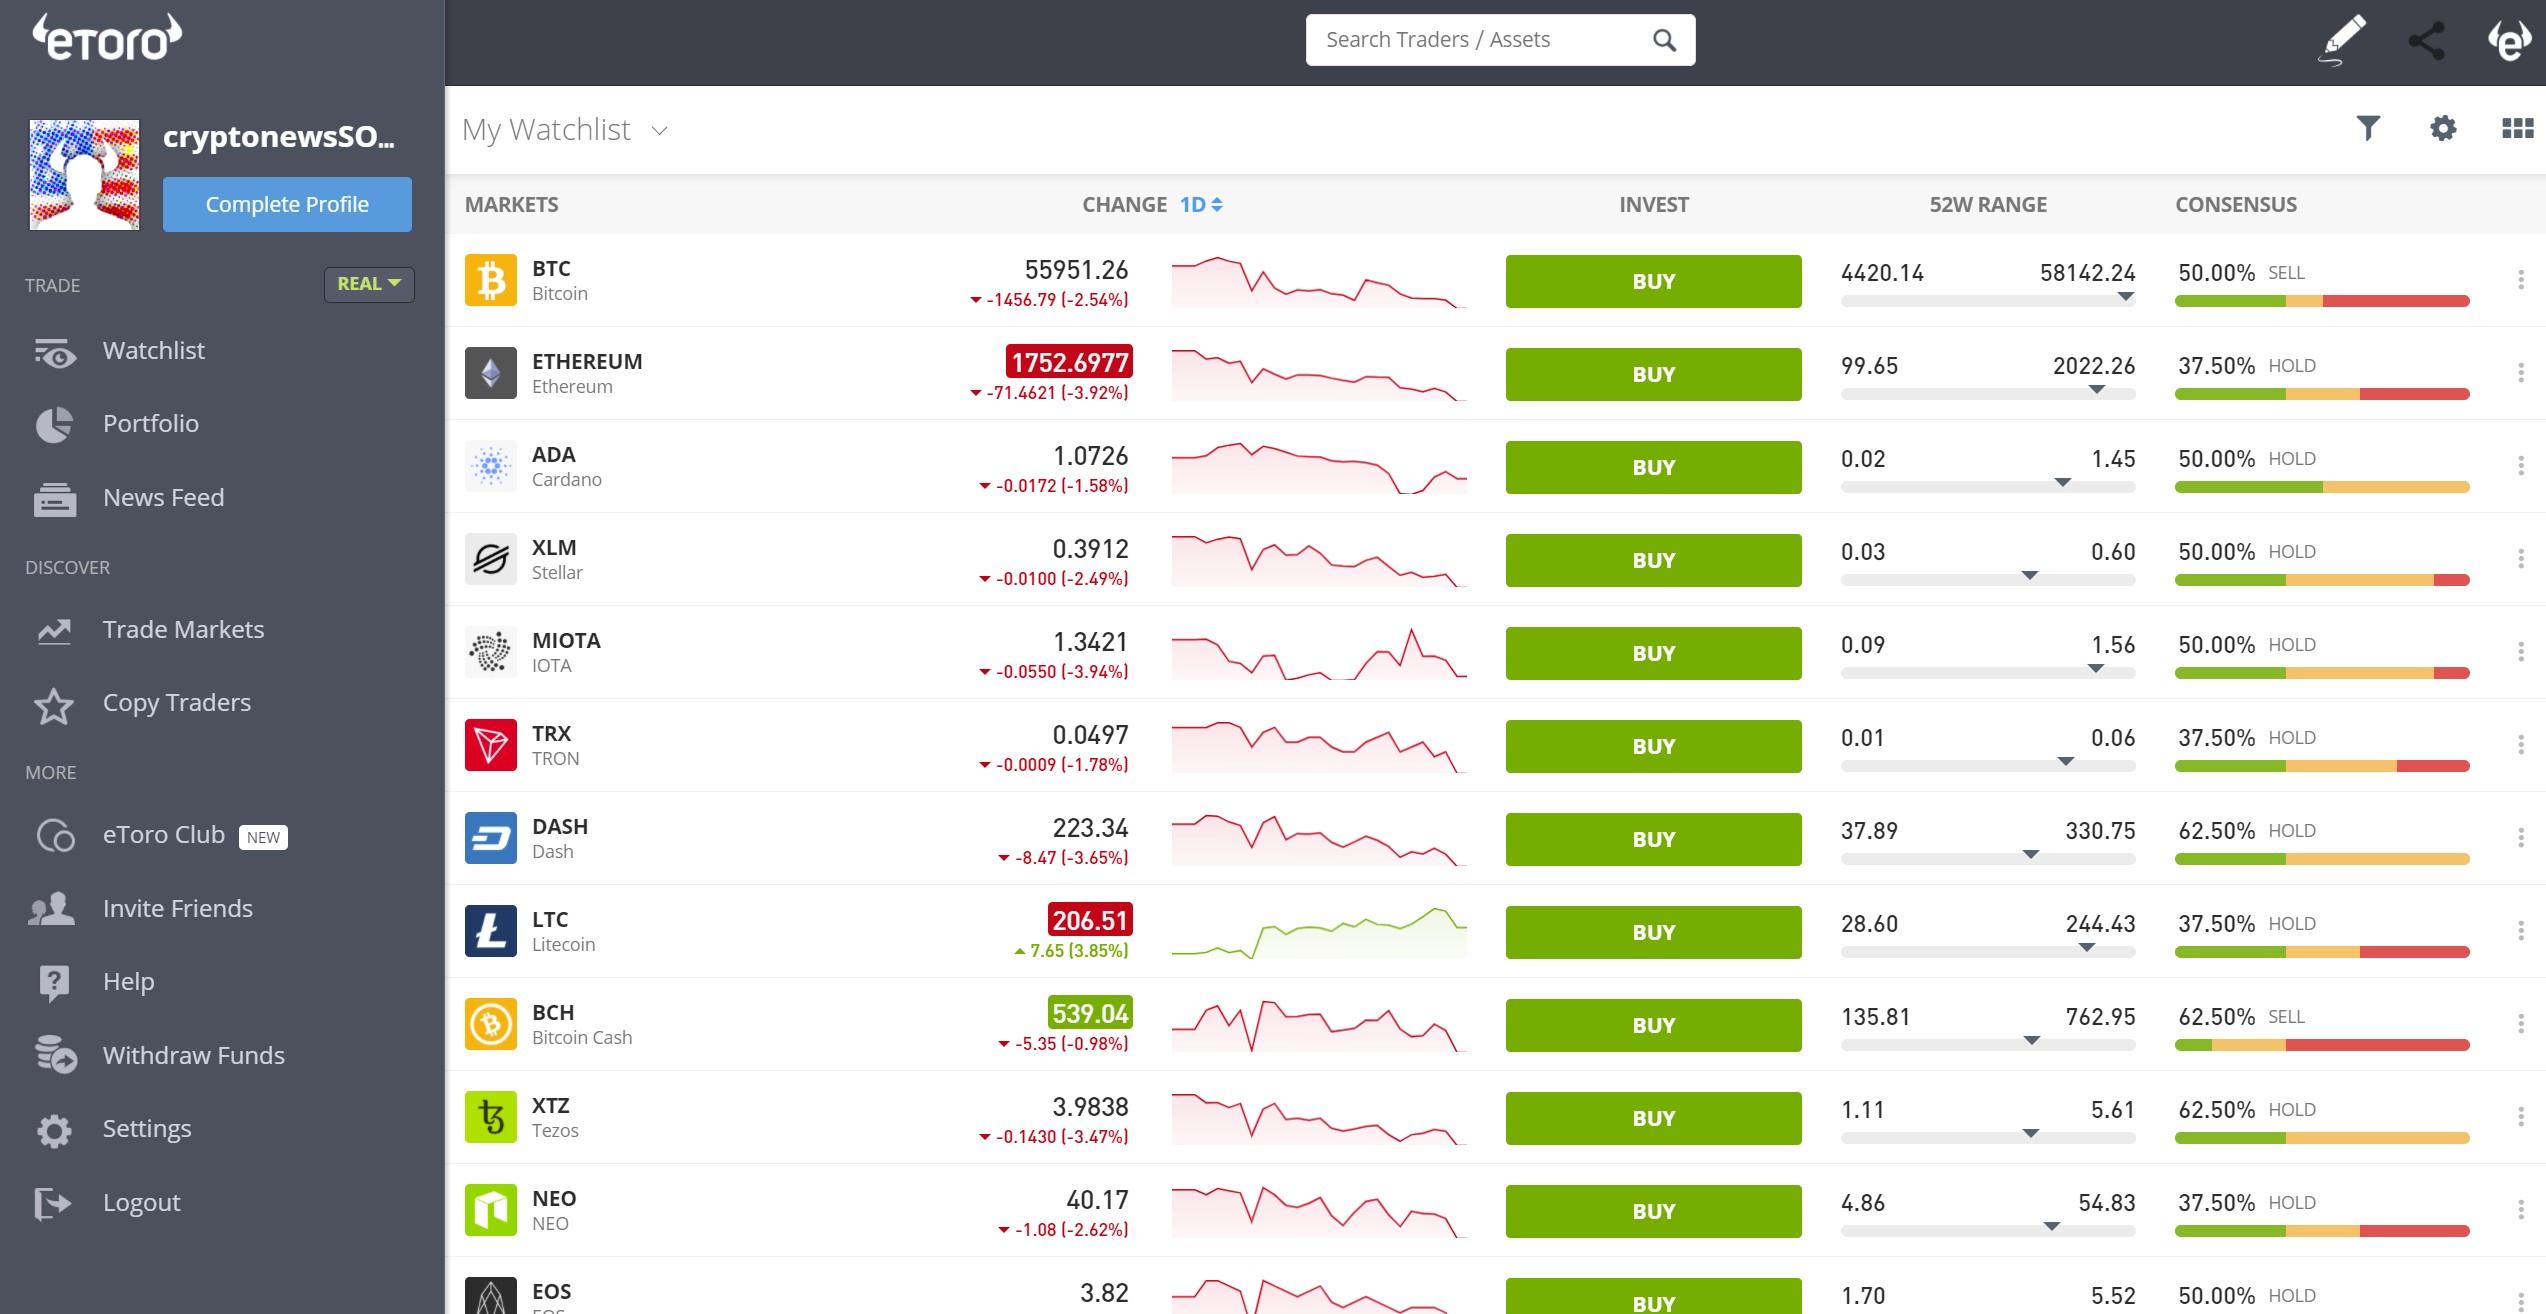 eToro US Review (2021) - Is It A Good Place to Buy Crypto?